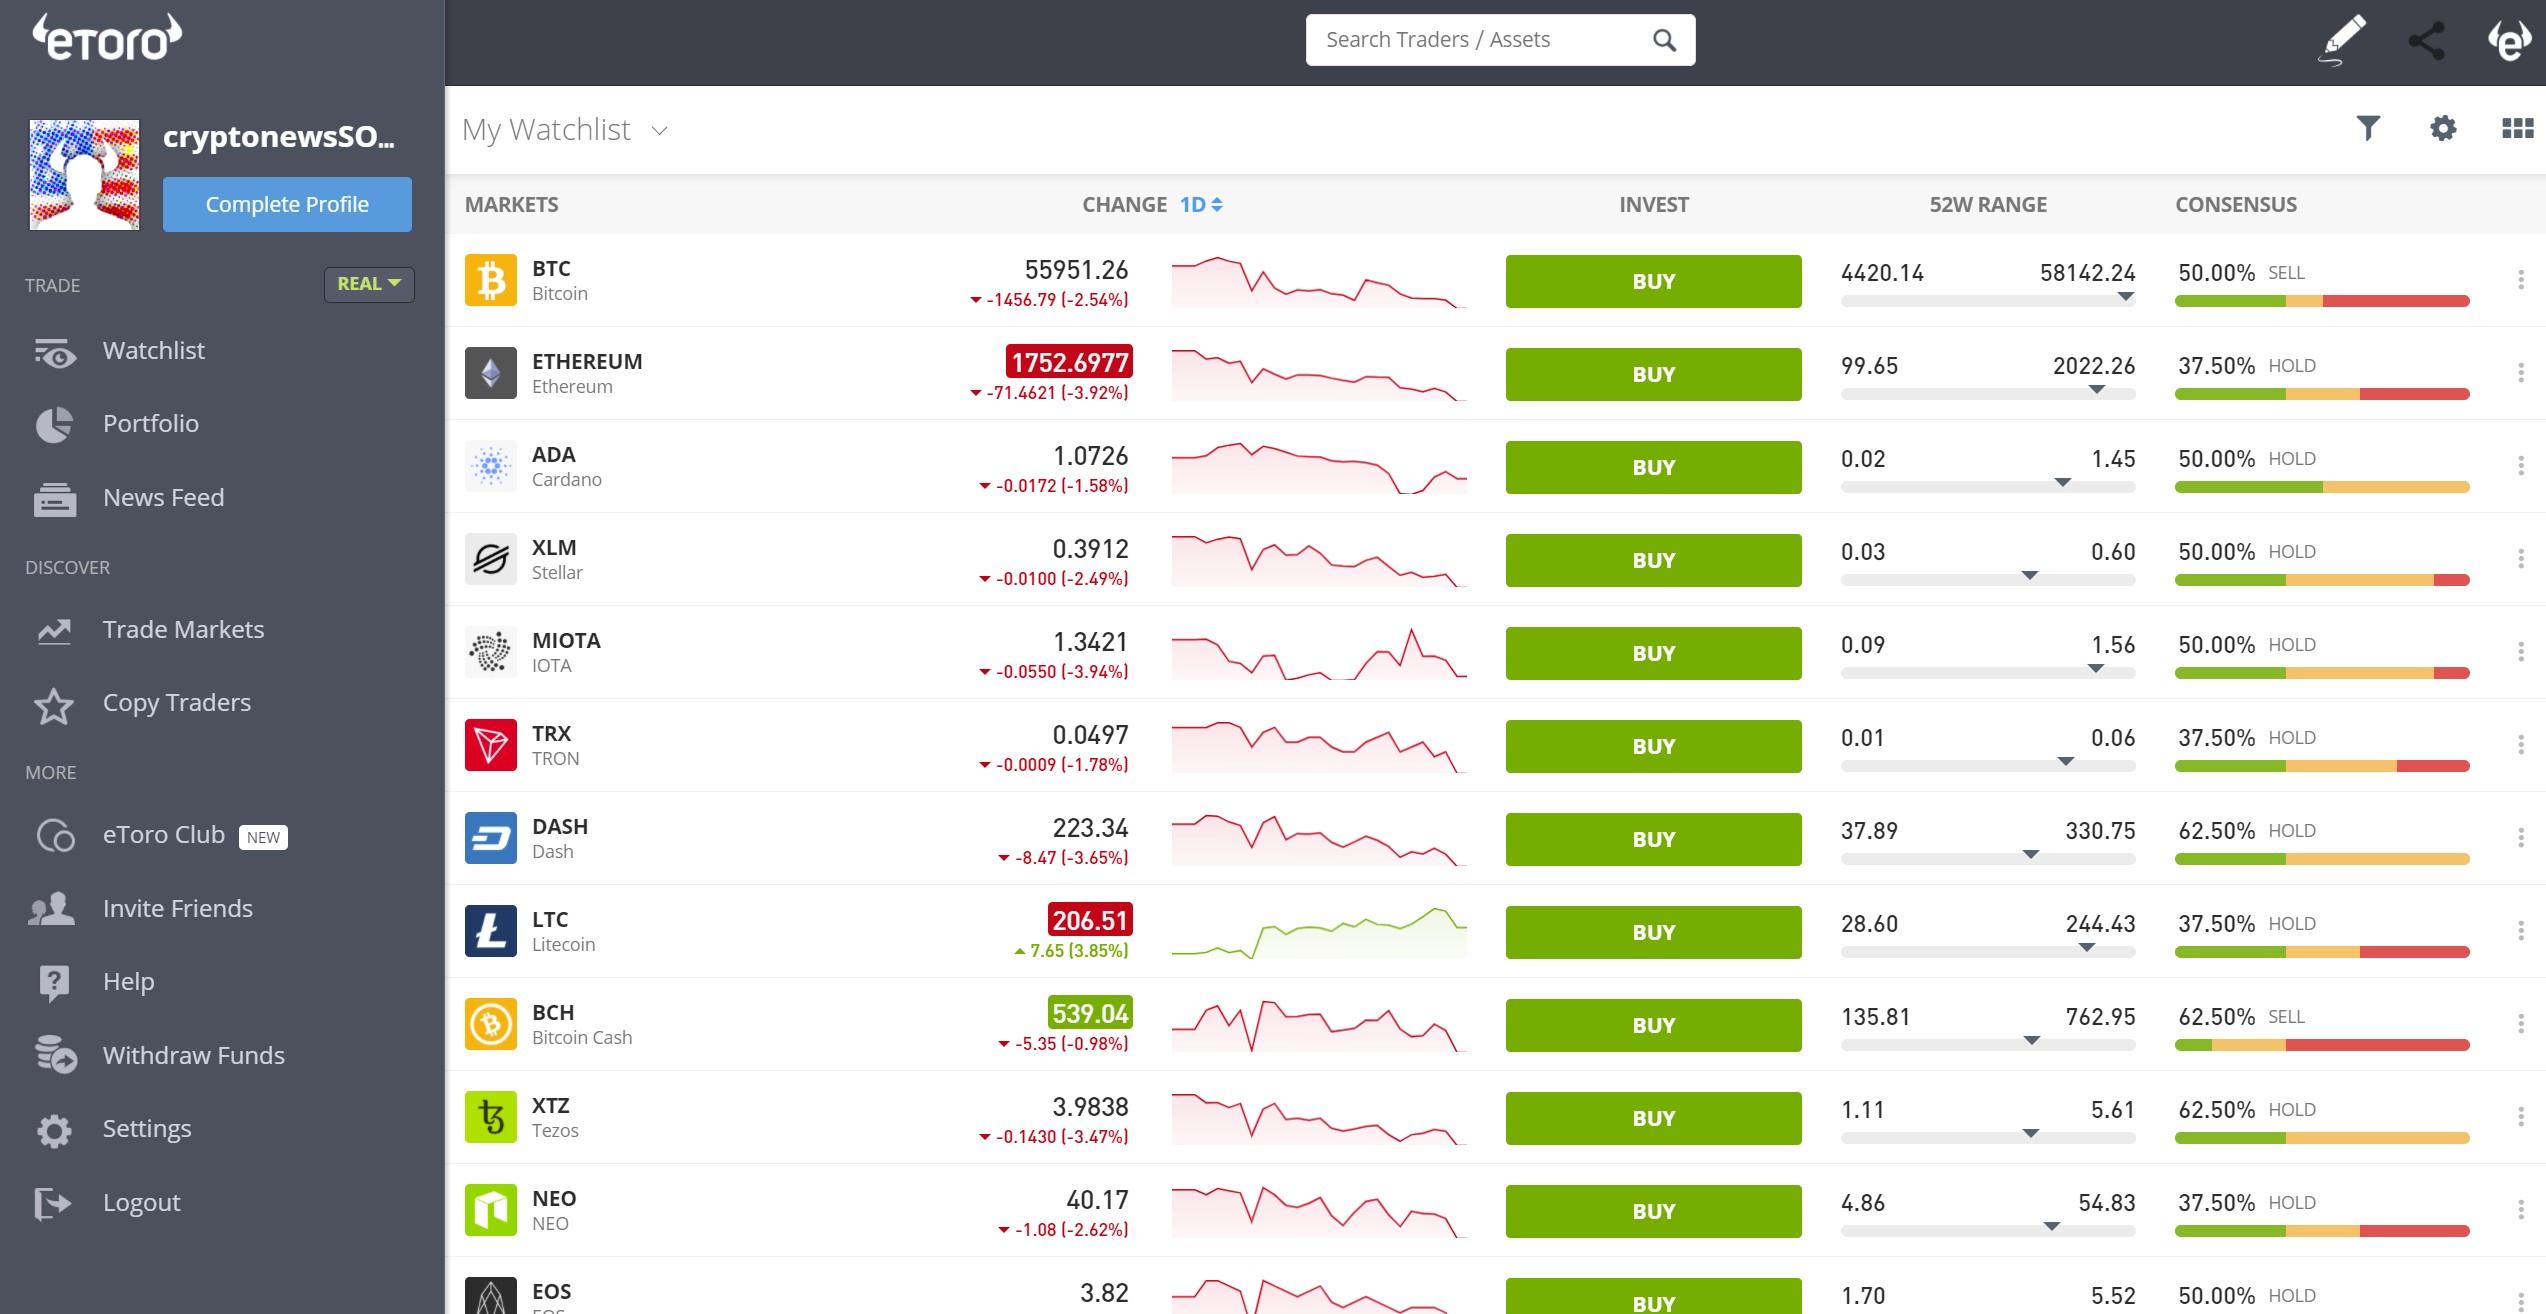 eToro US Review (2021) - Is It A Good Place to Buy Crypto?